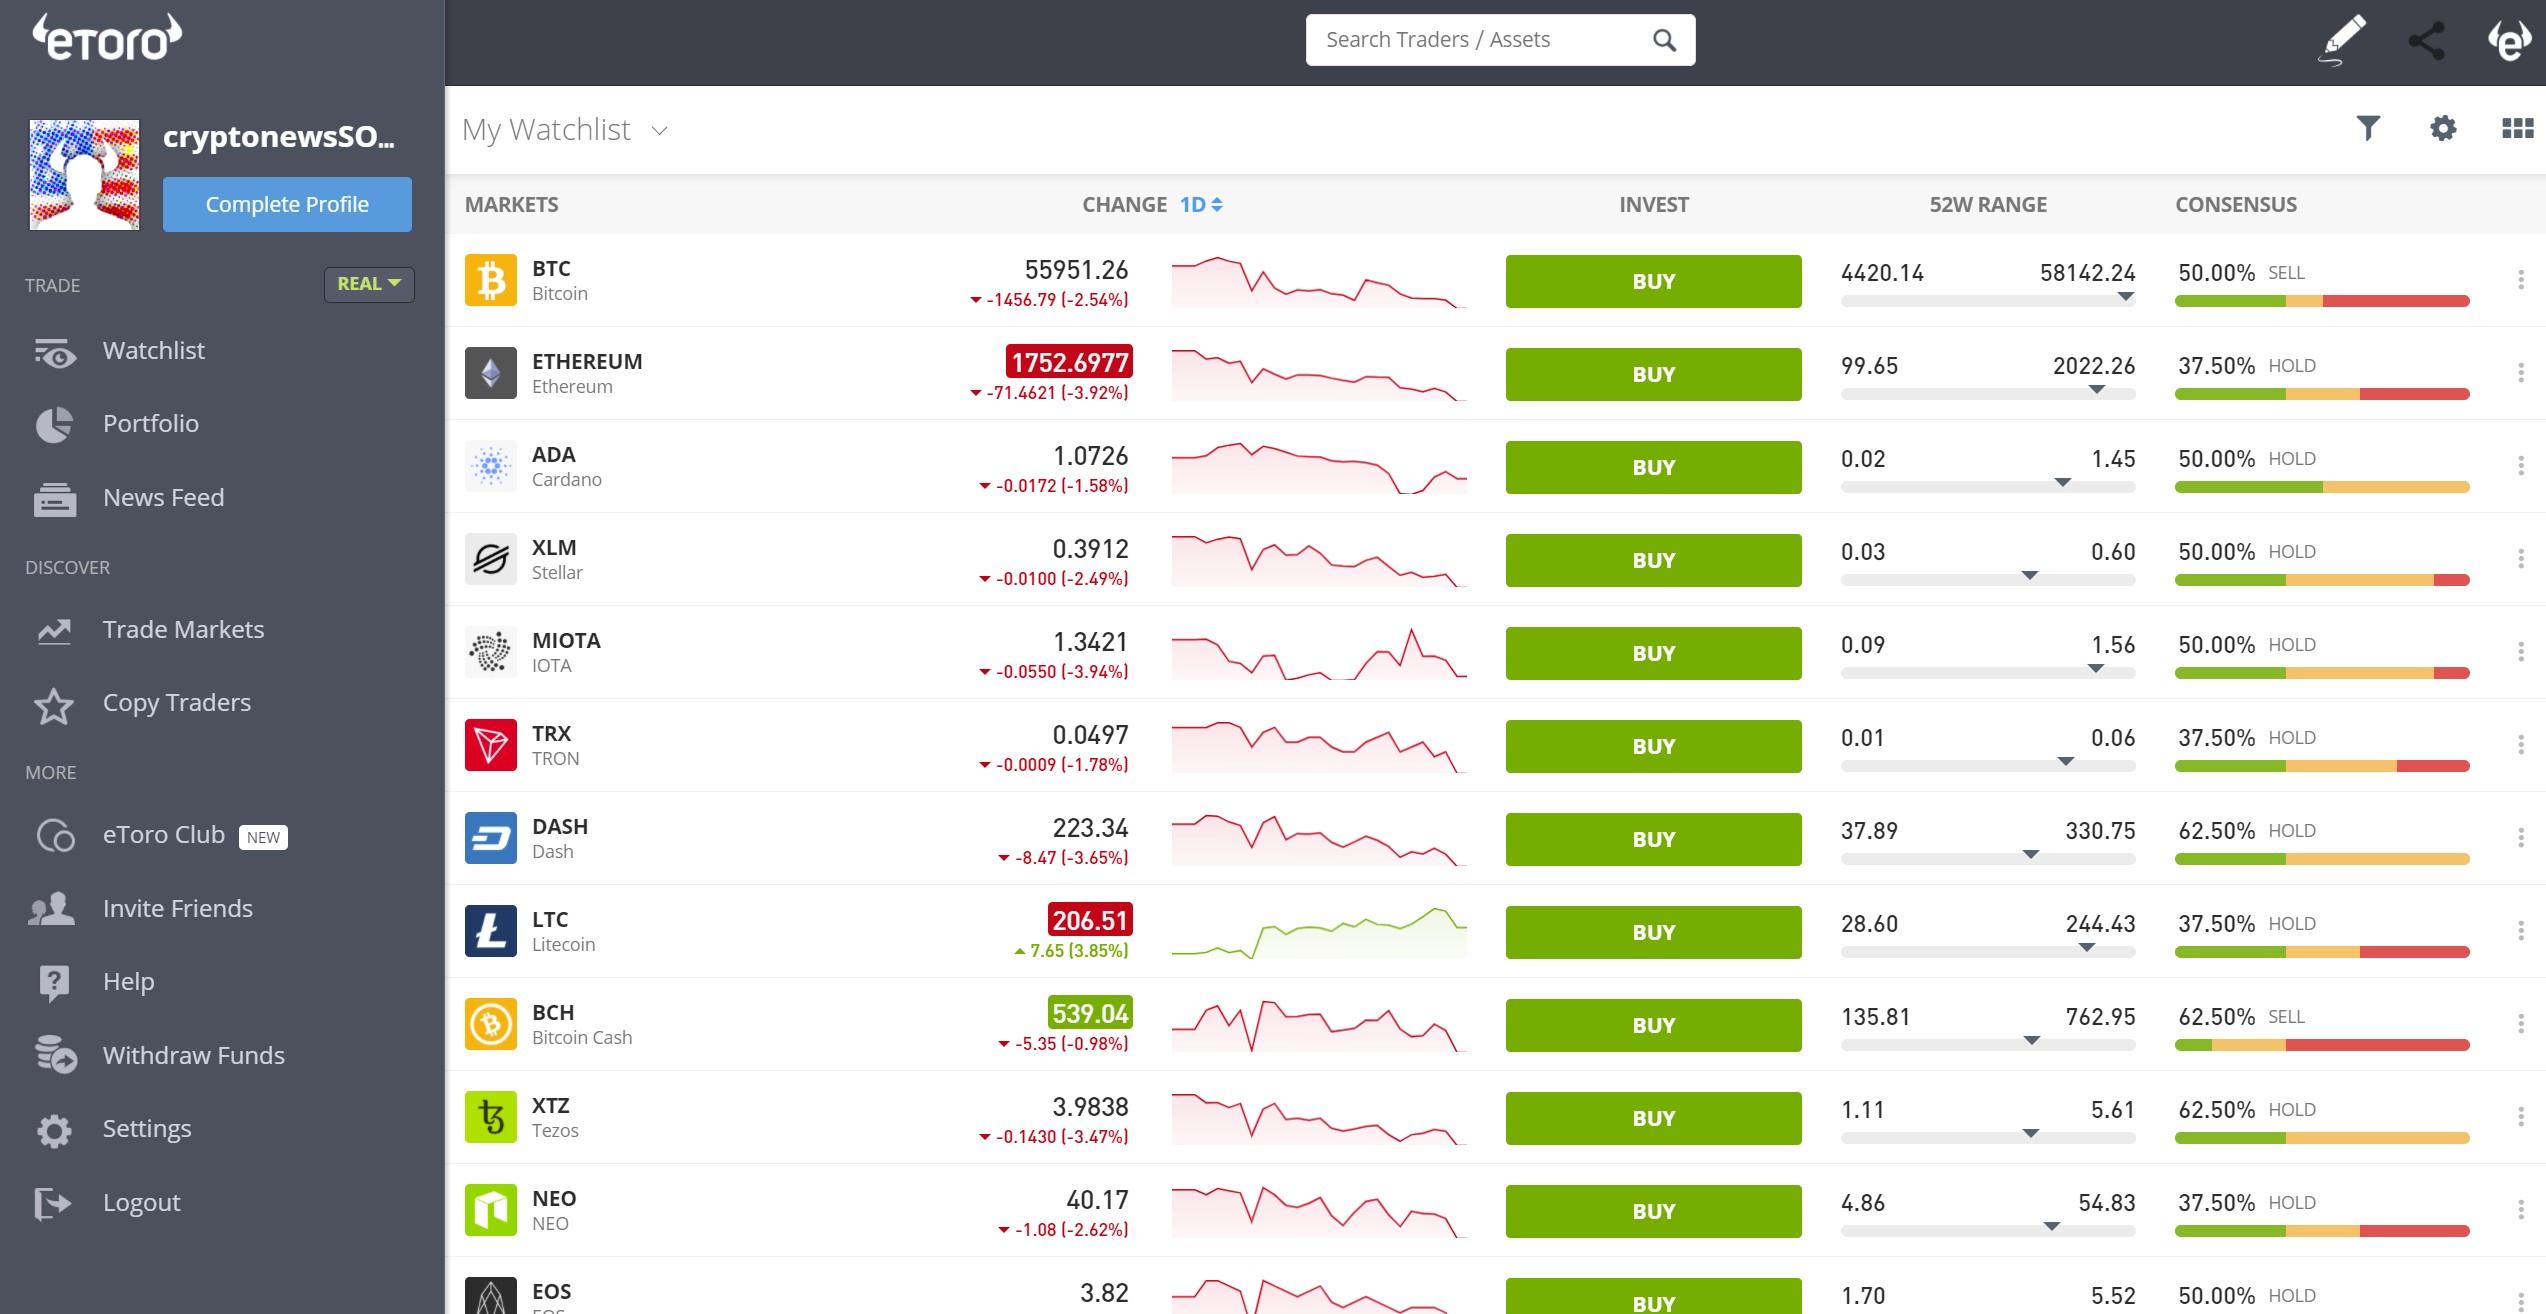 eToro US Review (2021) - Is It A Good Place to Buy Crypto?